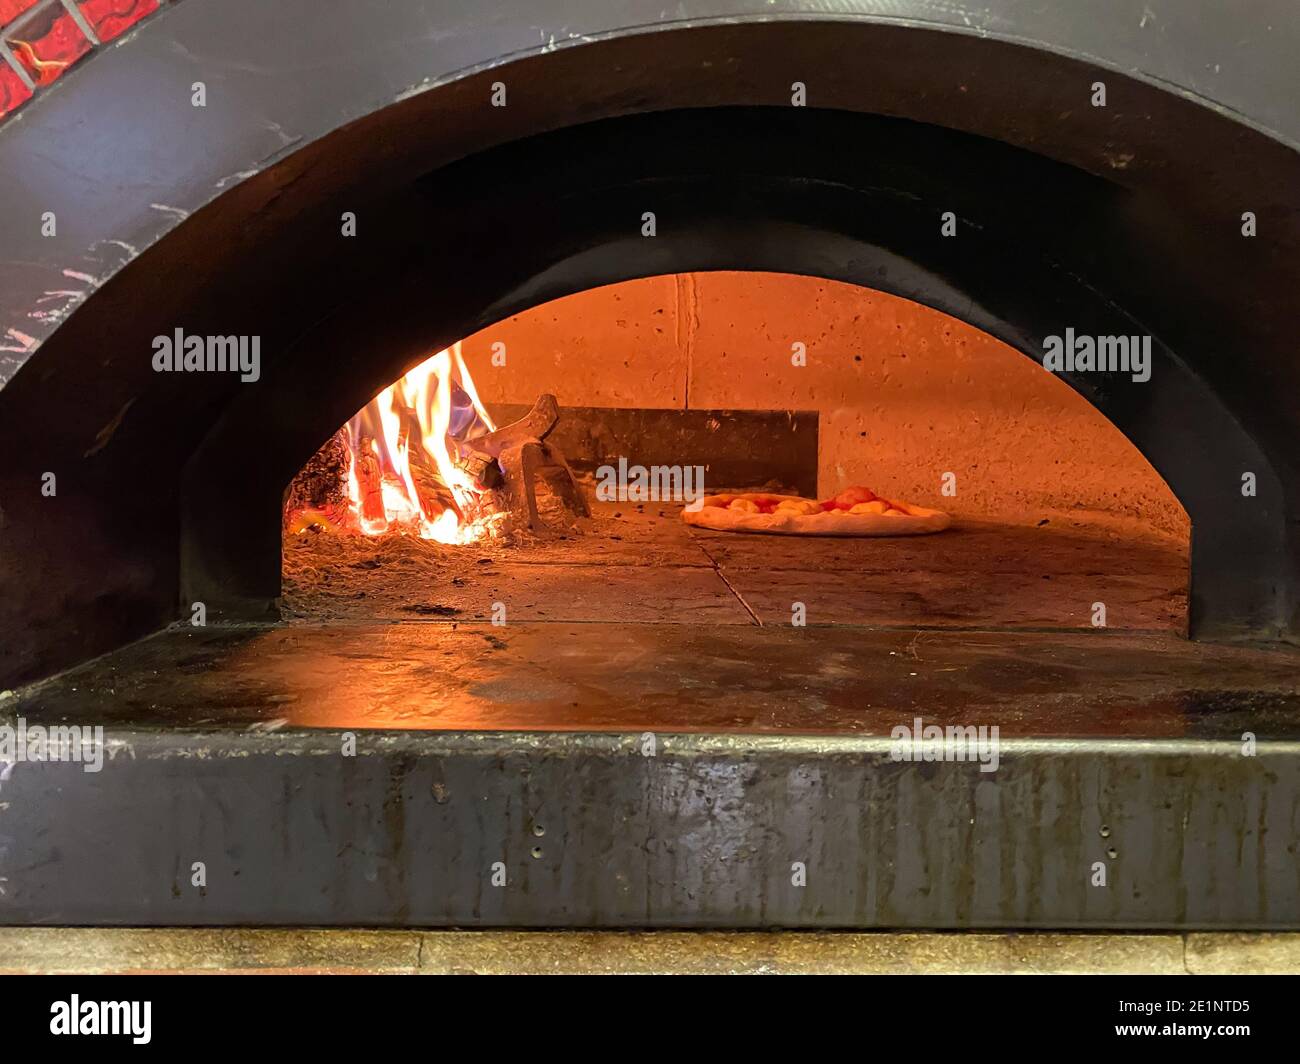 Baking oven, fireplace in the middle next to rising dough pizza, Italian traditional dish Stock Photo